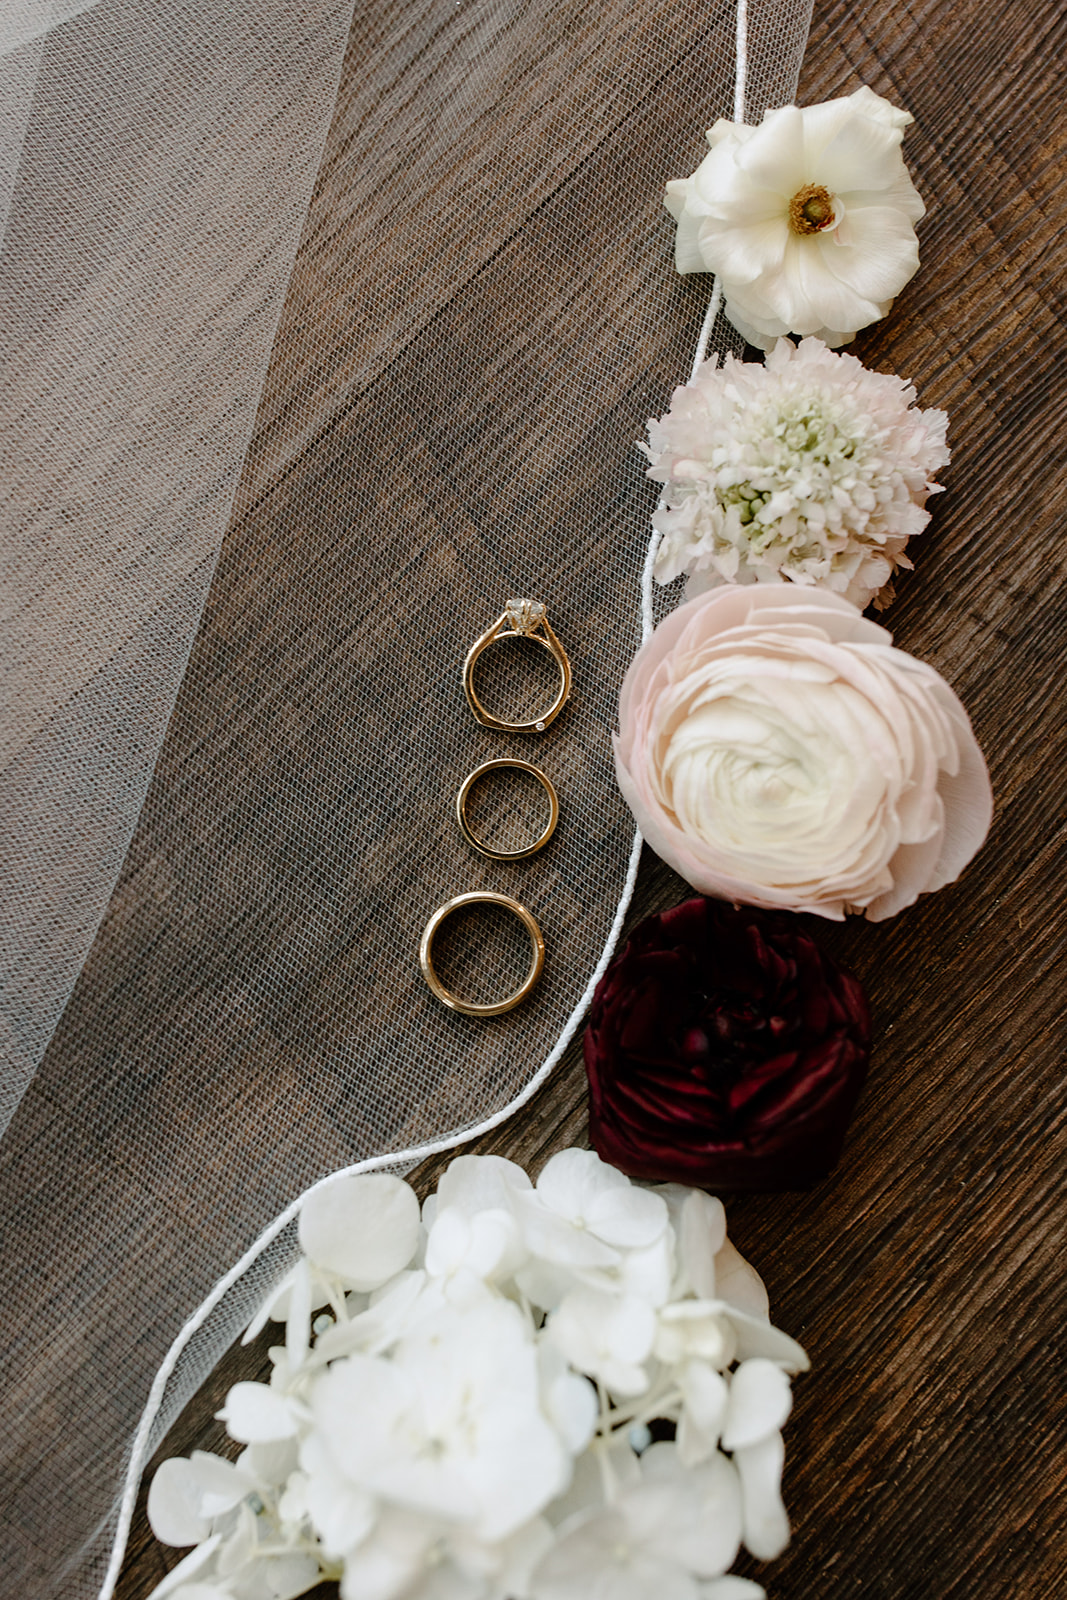 Flat lay of jewelry, shoes, and florals